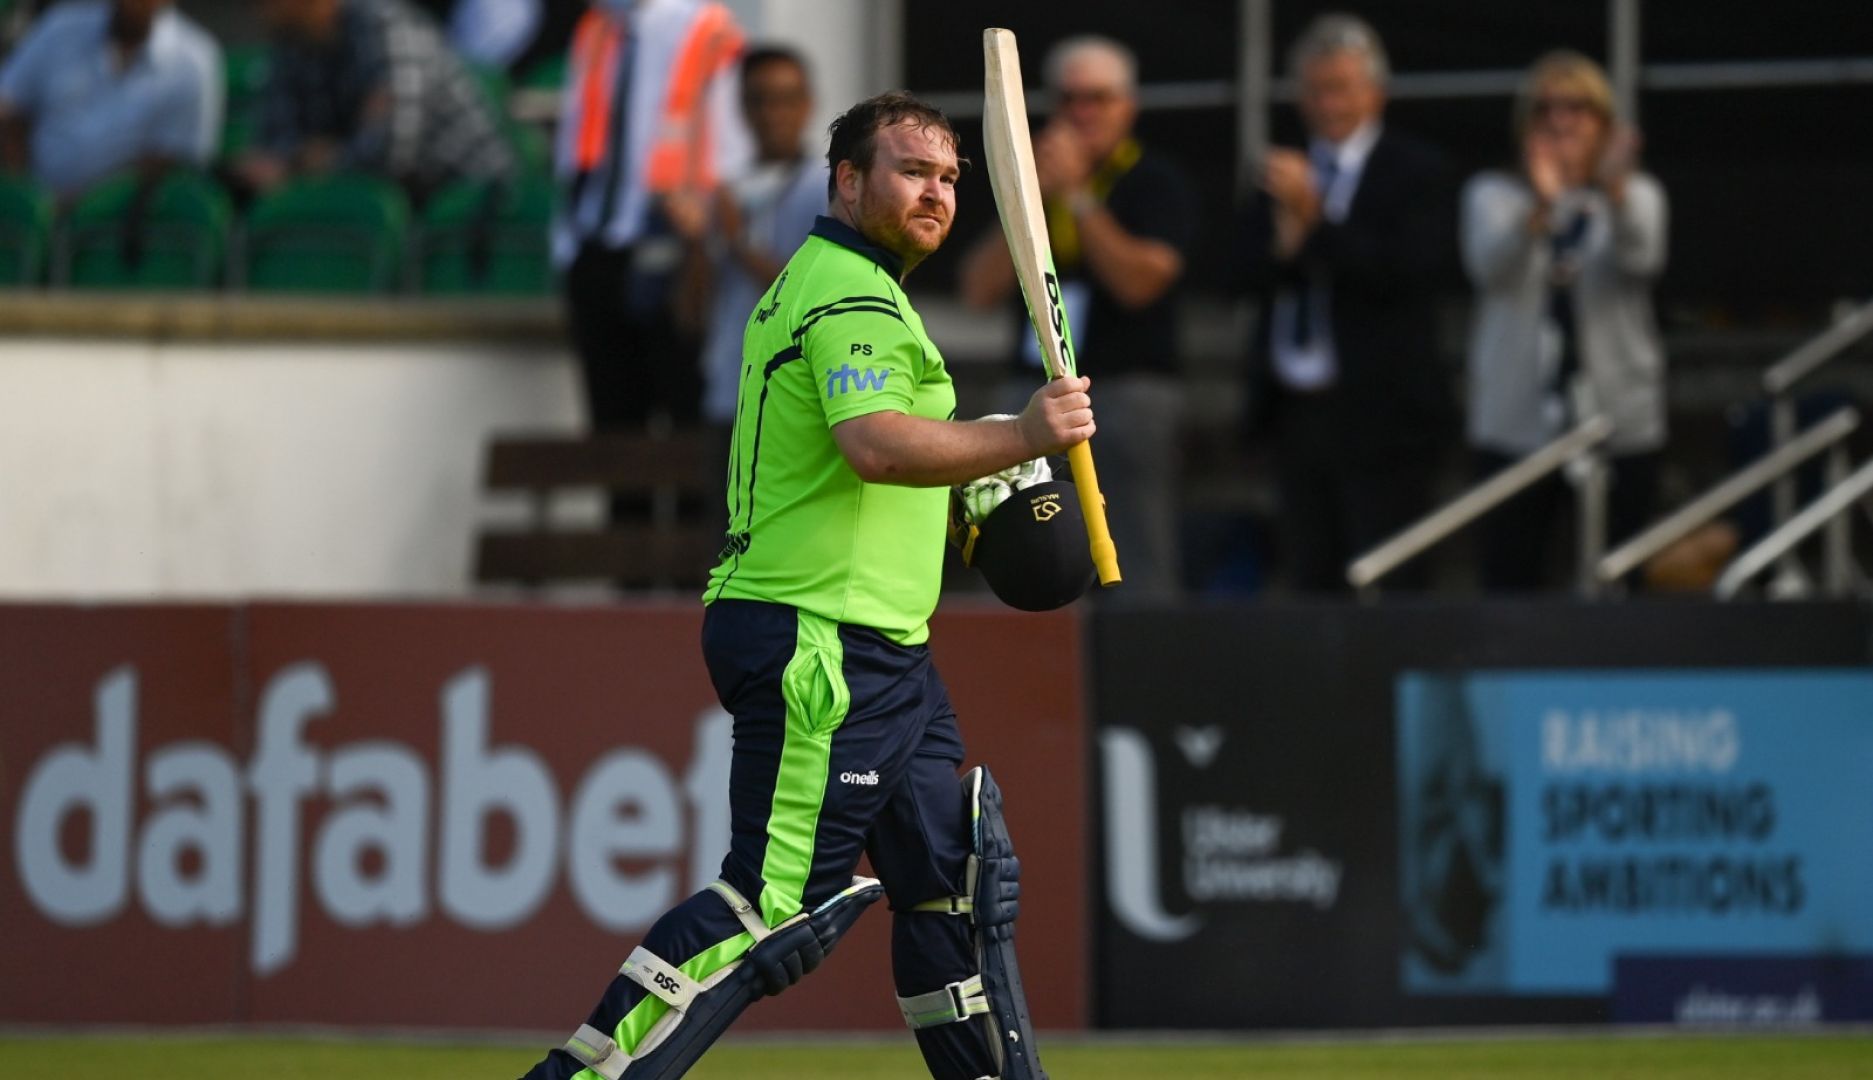 IRE vs ZIM | Paul Stirling’s hundred down Zimbabwe to give Ireland 2-1 lead in series